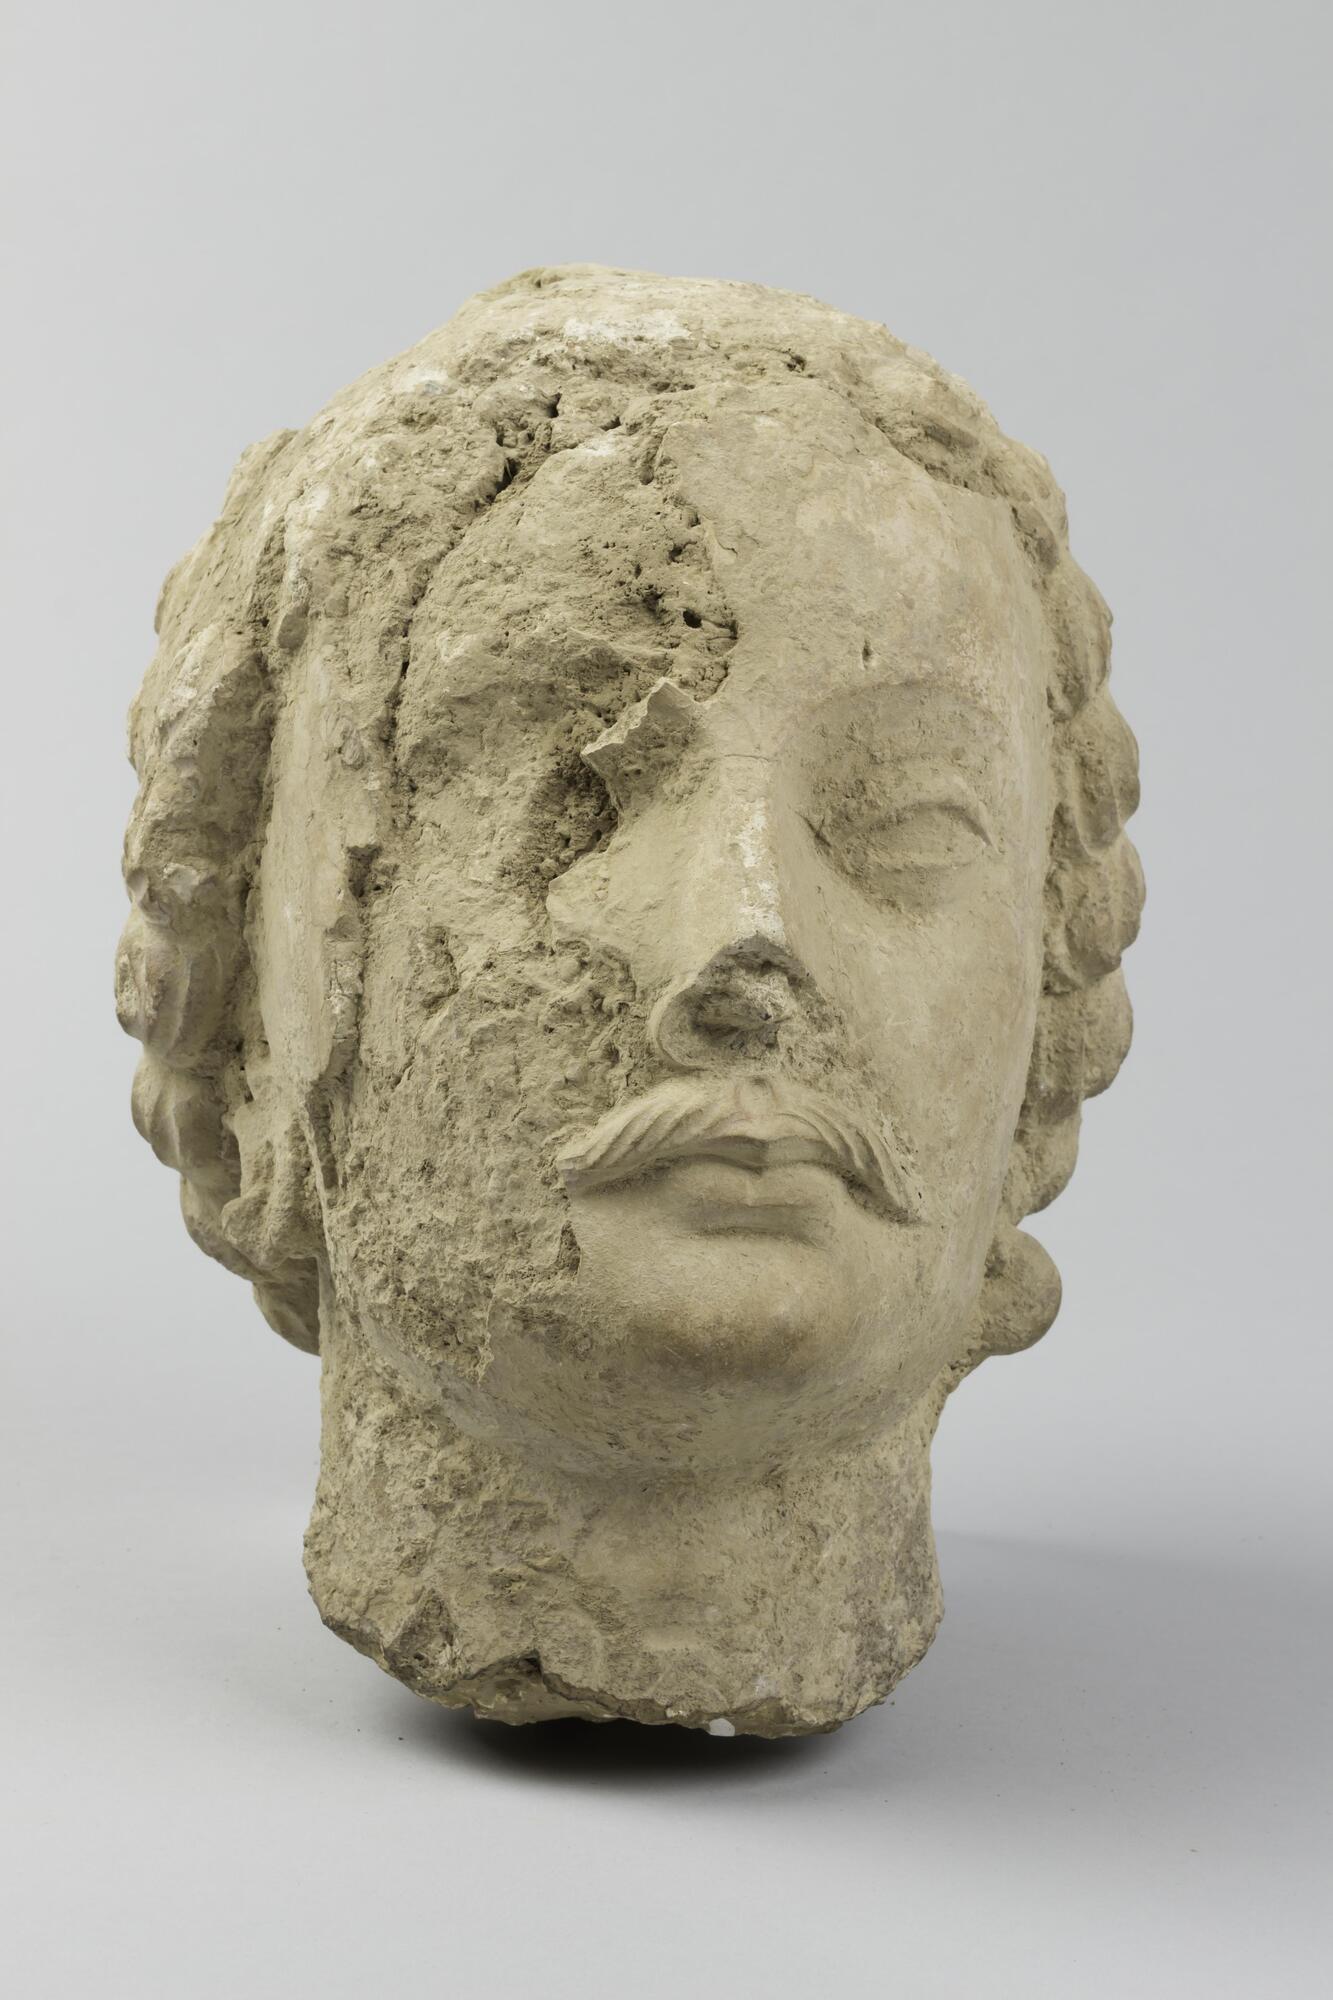 This head of a male figure with curly hair and a mustache would once have been part of a large stucco sculpture group. Part of the stucco has flaked away from the right-hand side of the face.